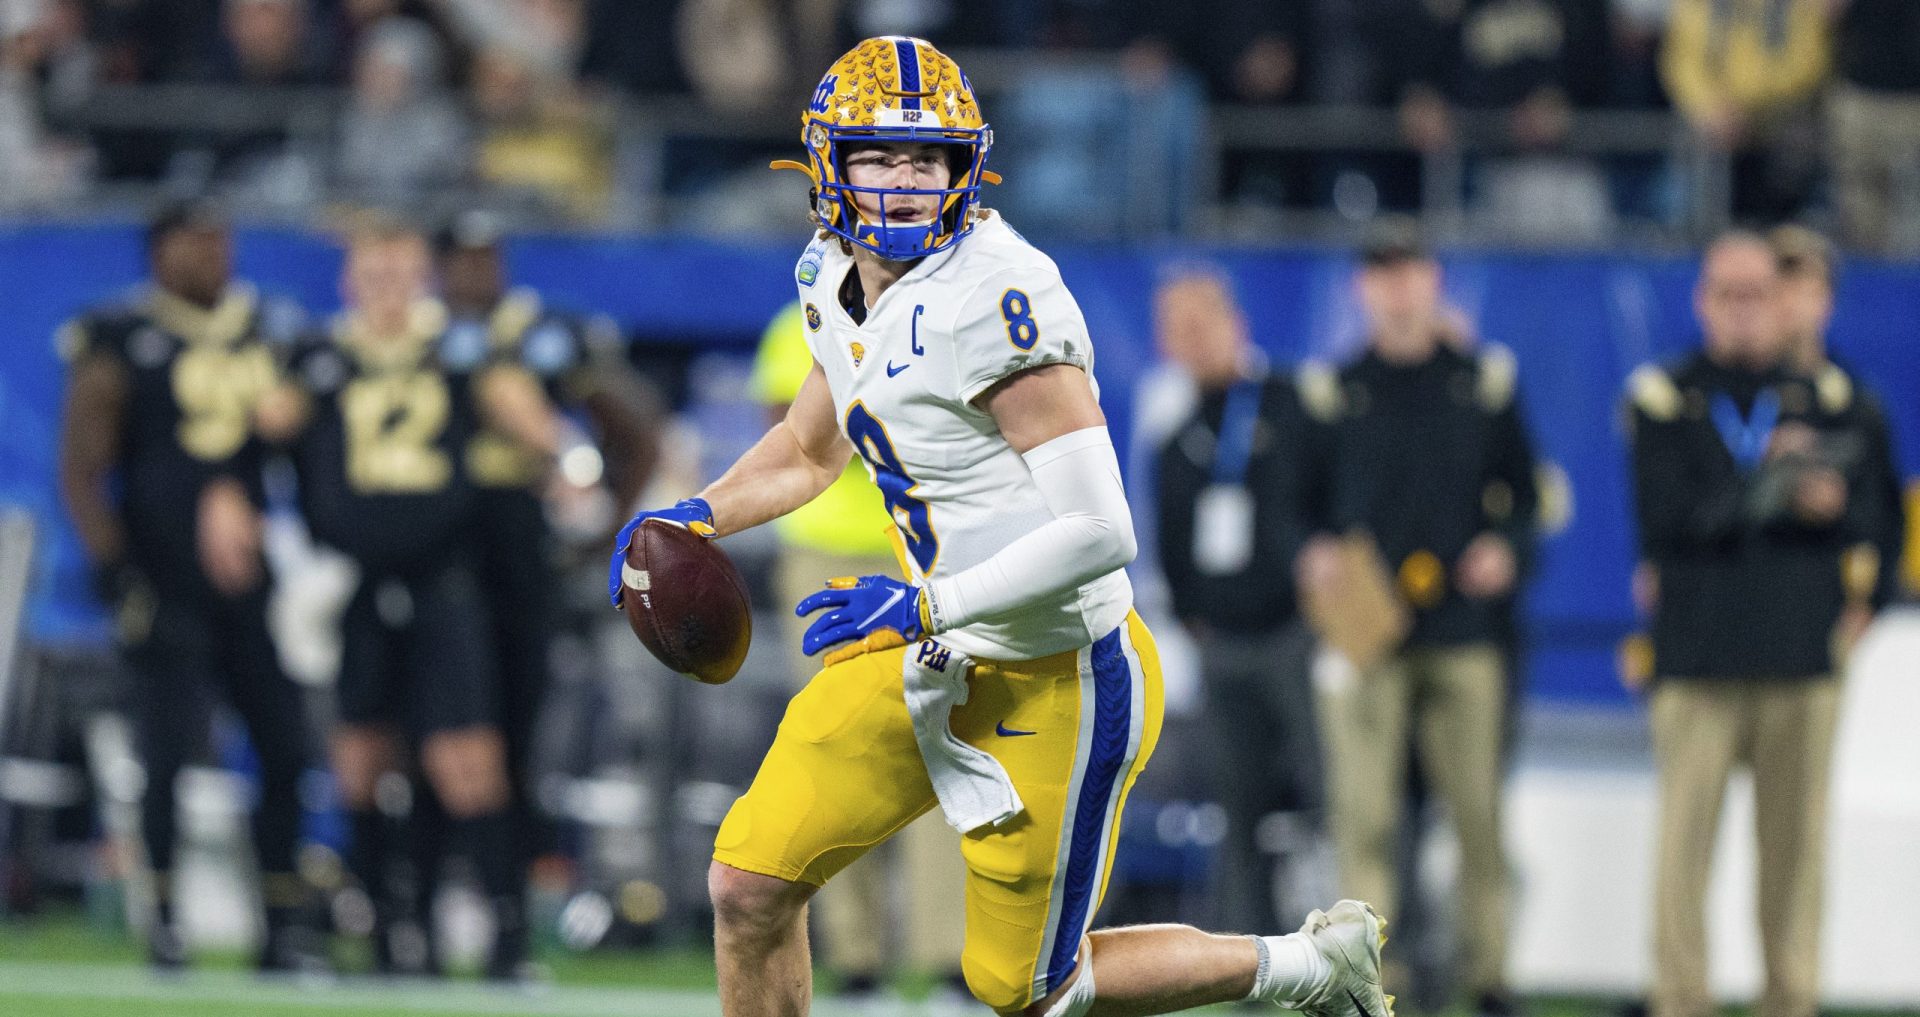 Pittsburgh Panthers quarterback Kenny Pickett (8) plays against the Wake Forest Demon Deacons during the Atlantic Coast Conference championship NCAA college football game Saturday, Dec. 4, 2021, in Charlotte, N.C. 